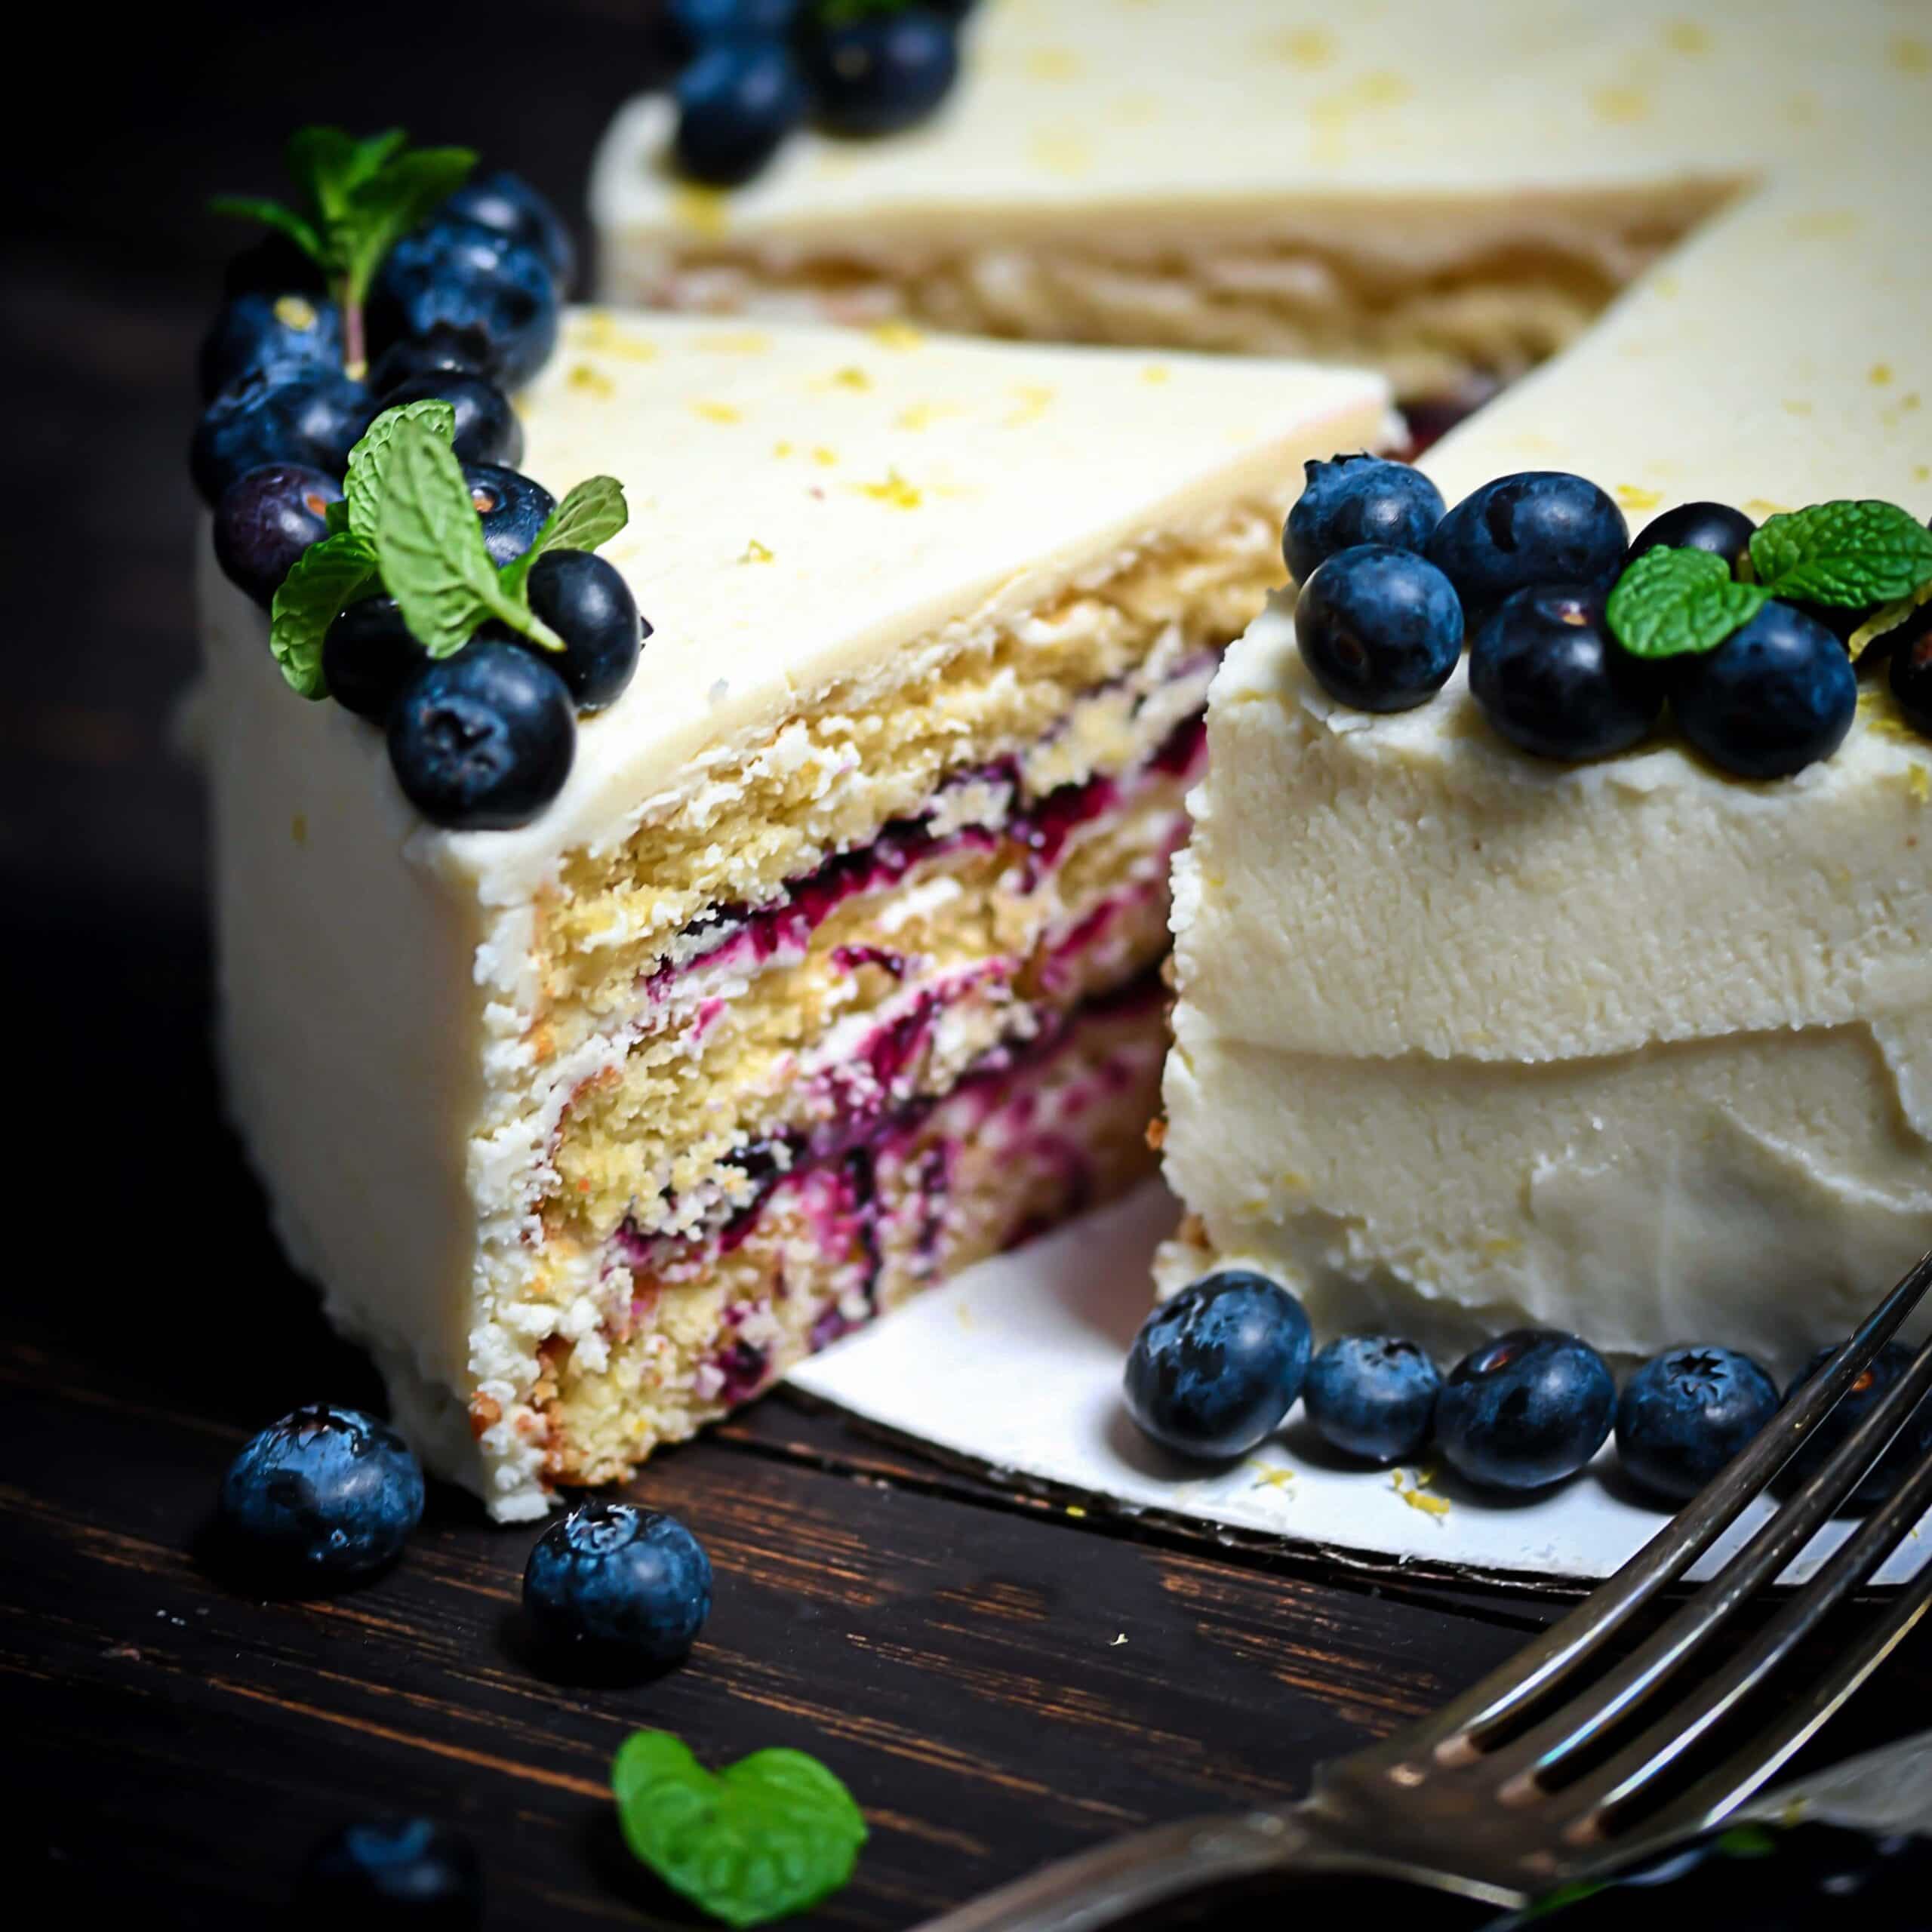 Gluten free lime and blueberry cake - delicious and healthy!